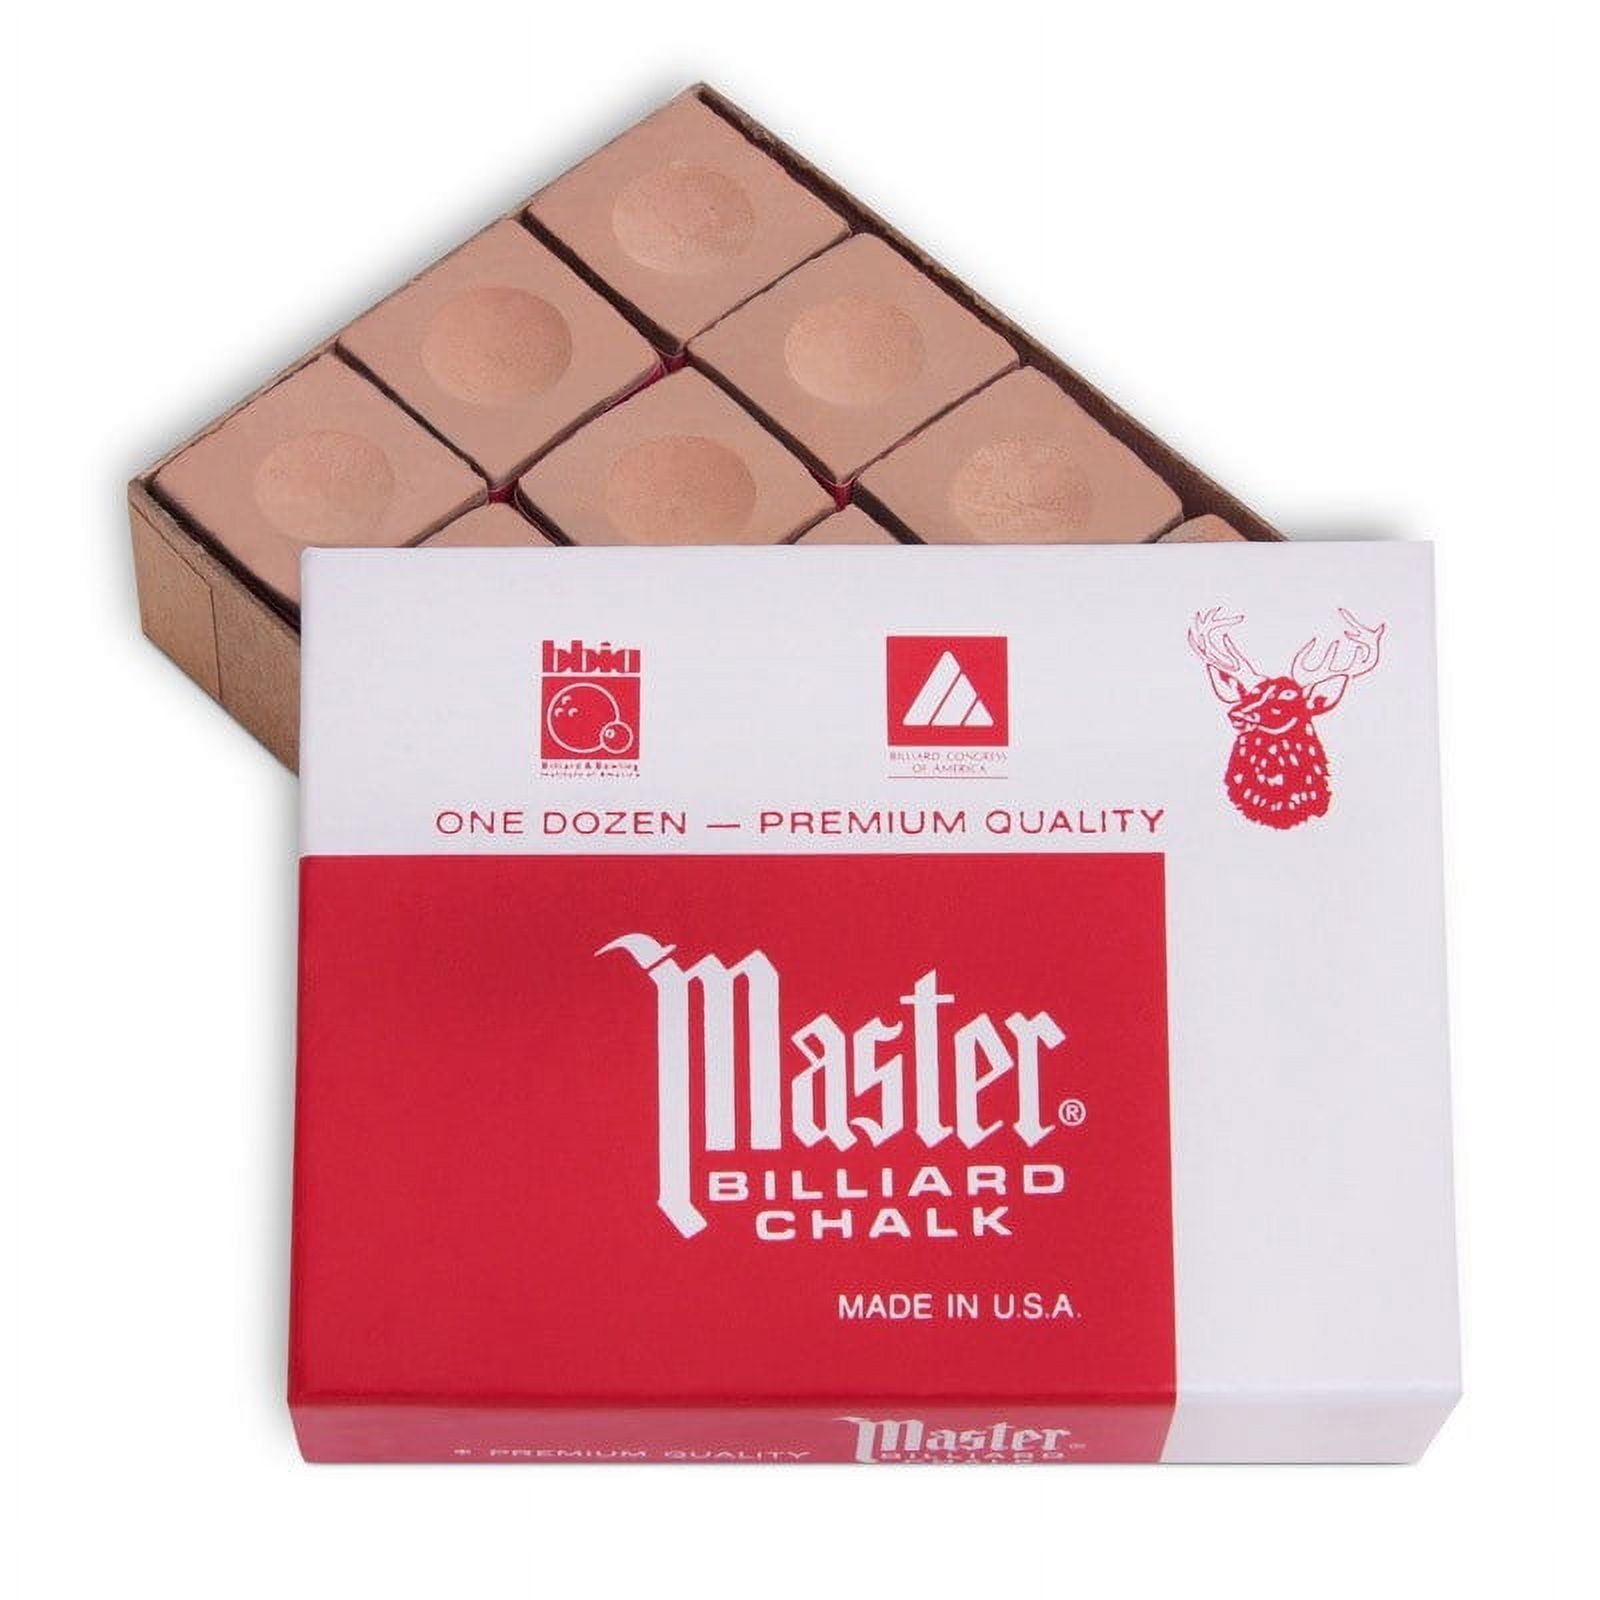 Made in the USA - 2 Boxes of Master Chalk - 24 Pieces for Pool Cues and  Billiards Sticks Tips